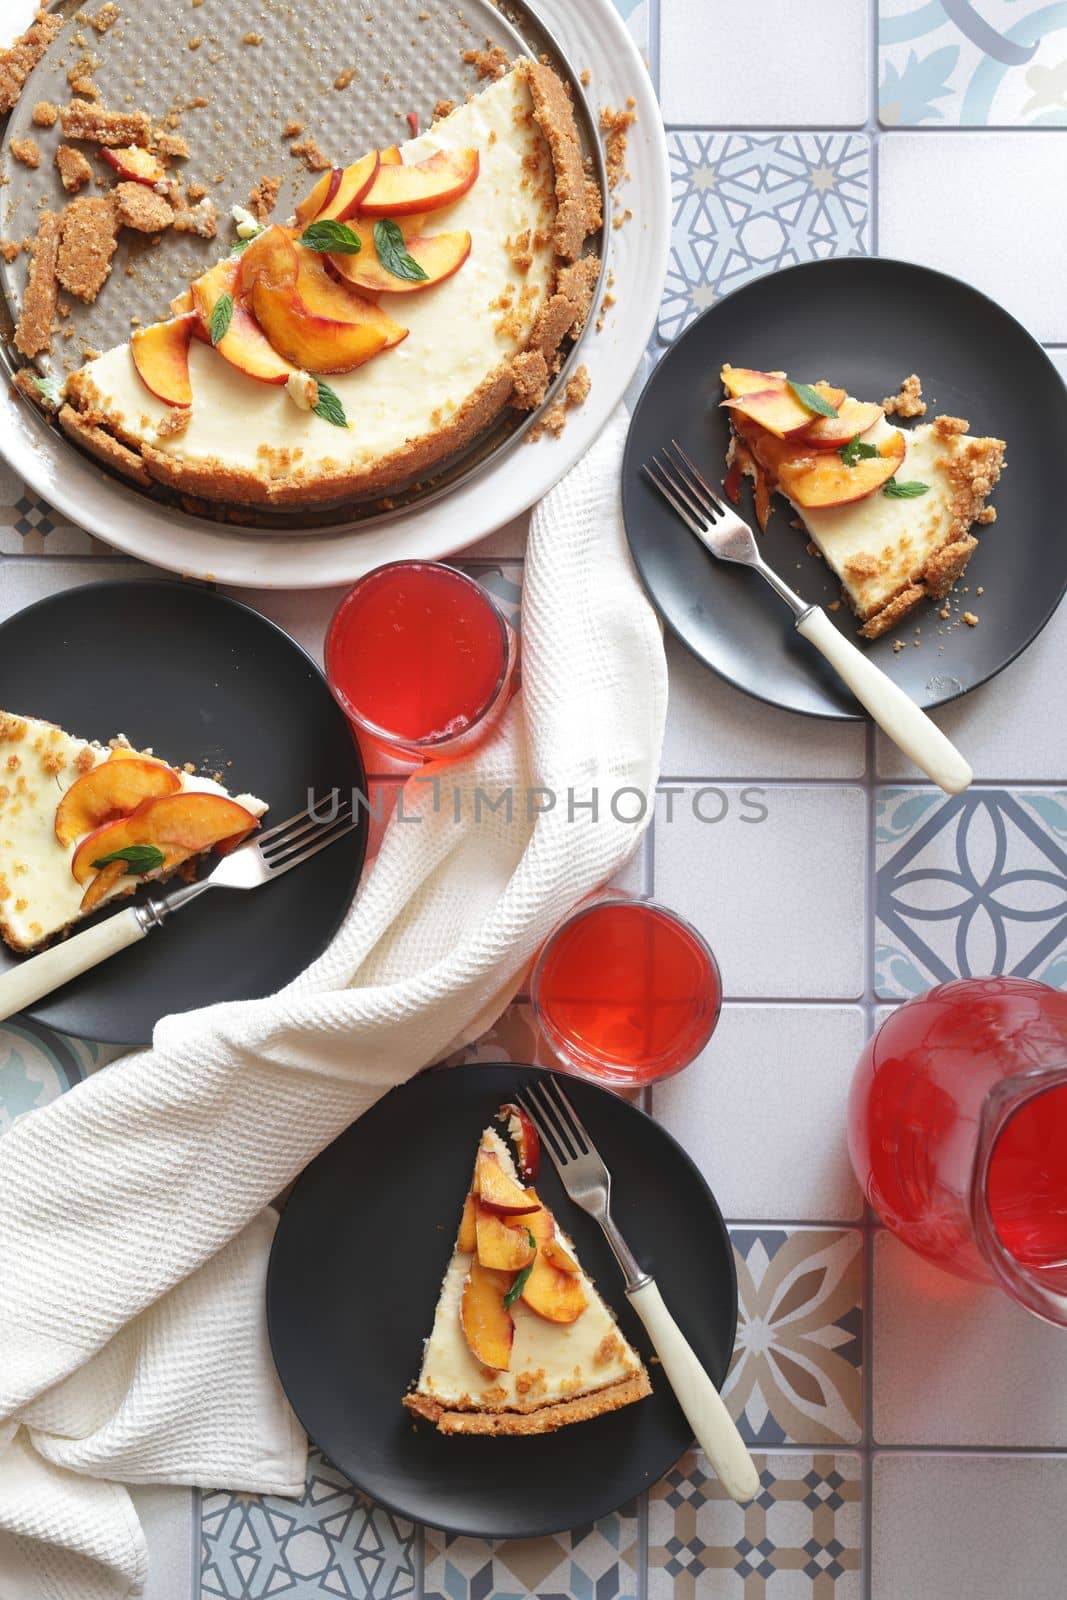 Portions of ginger tart with fresh peach slices on black plates. Tart cut into portions with crumbs. Berry juice in glass glasses by Proxima13